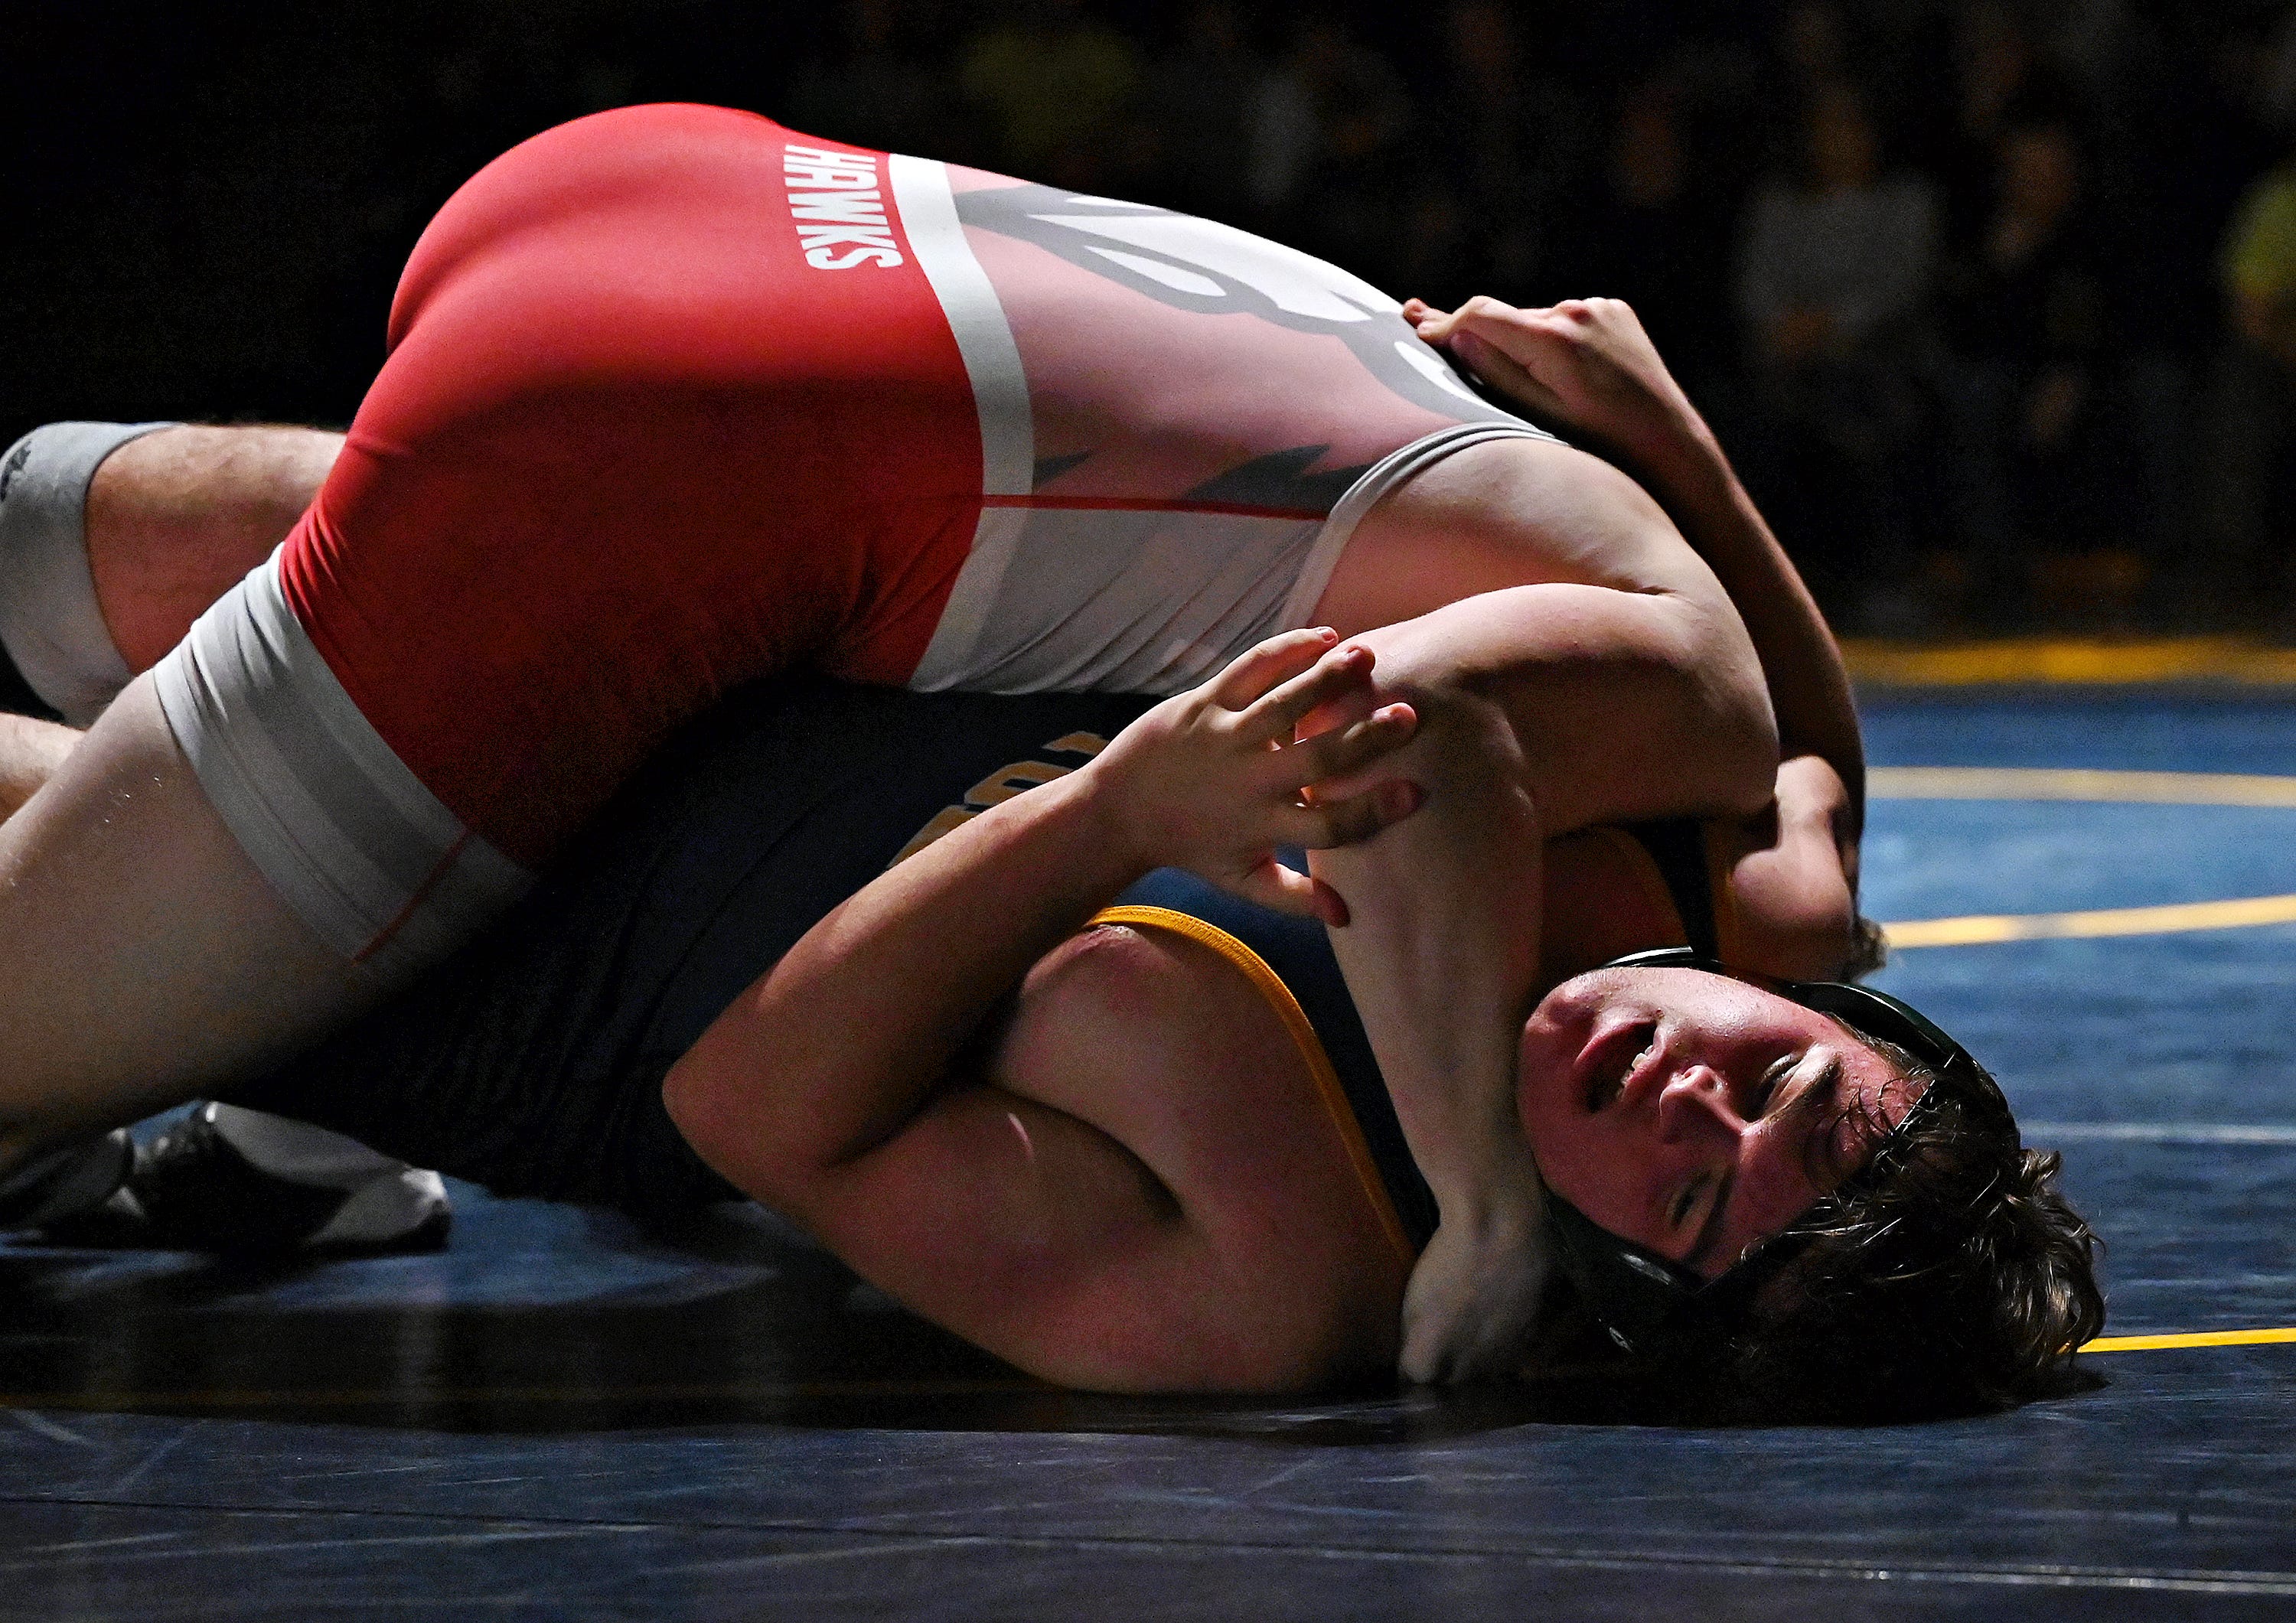 Eastern York’s Jack Murray, left, and Hamburg’s Mason Semmel compete in the 215-pound weight class during PIAA District 3, Class 2-A first round wrestling action at Eastern York High School in Lower Windsor Township, Monday, Jan. 30, 2023. Semmel would win the match and Eastern York would win the meet 50-22. Dawn J. Sagert photo